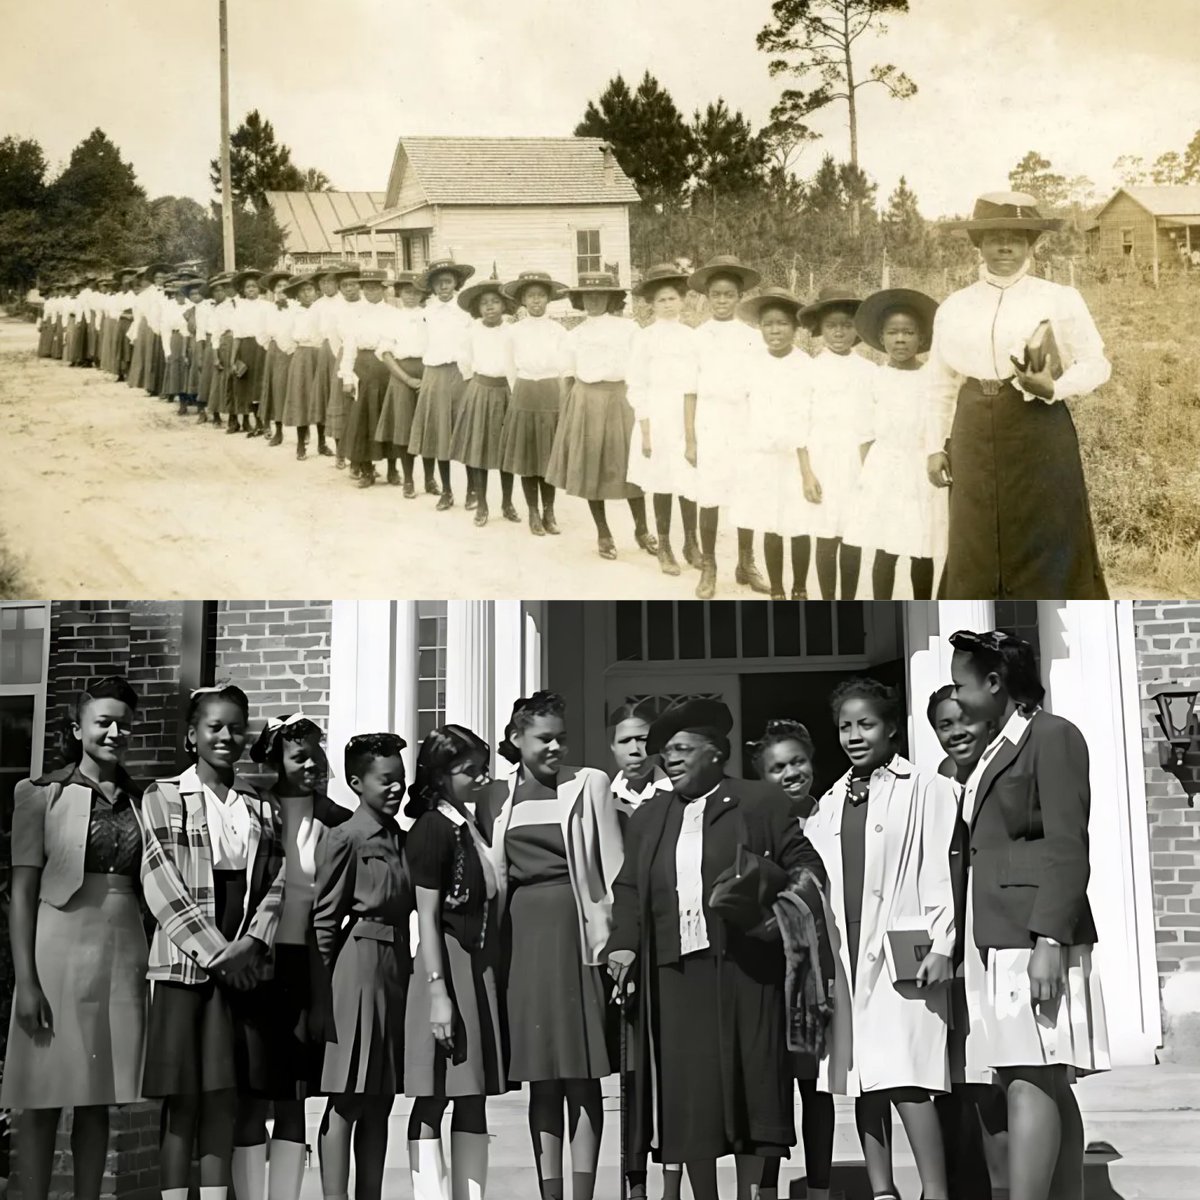 Mary McLeod Bethune, with $1.50, faith in God and 5 little girls, founded a school for African American students in Daytona Beach, which would later become Bethune-Cookman University!